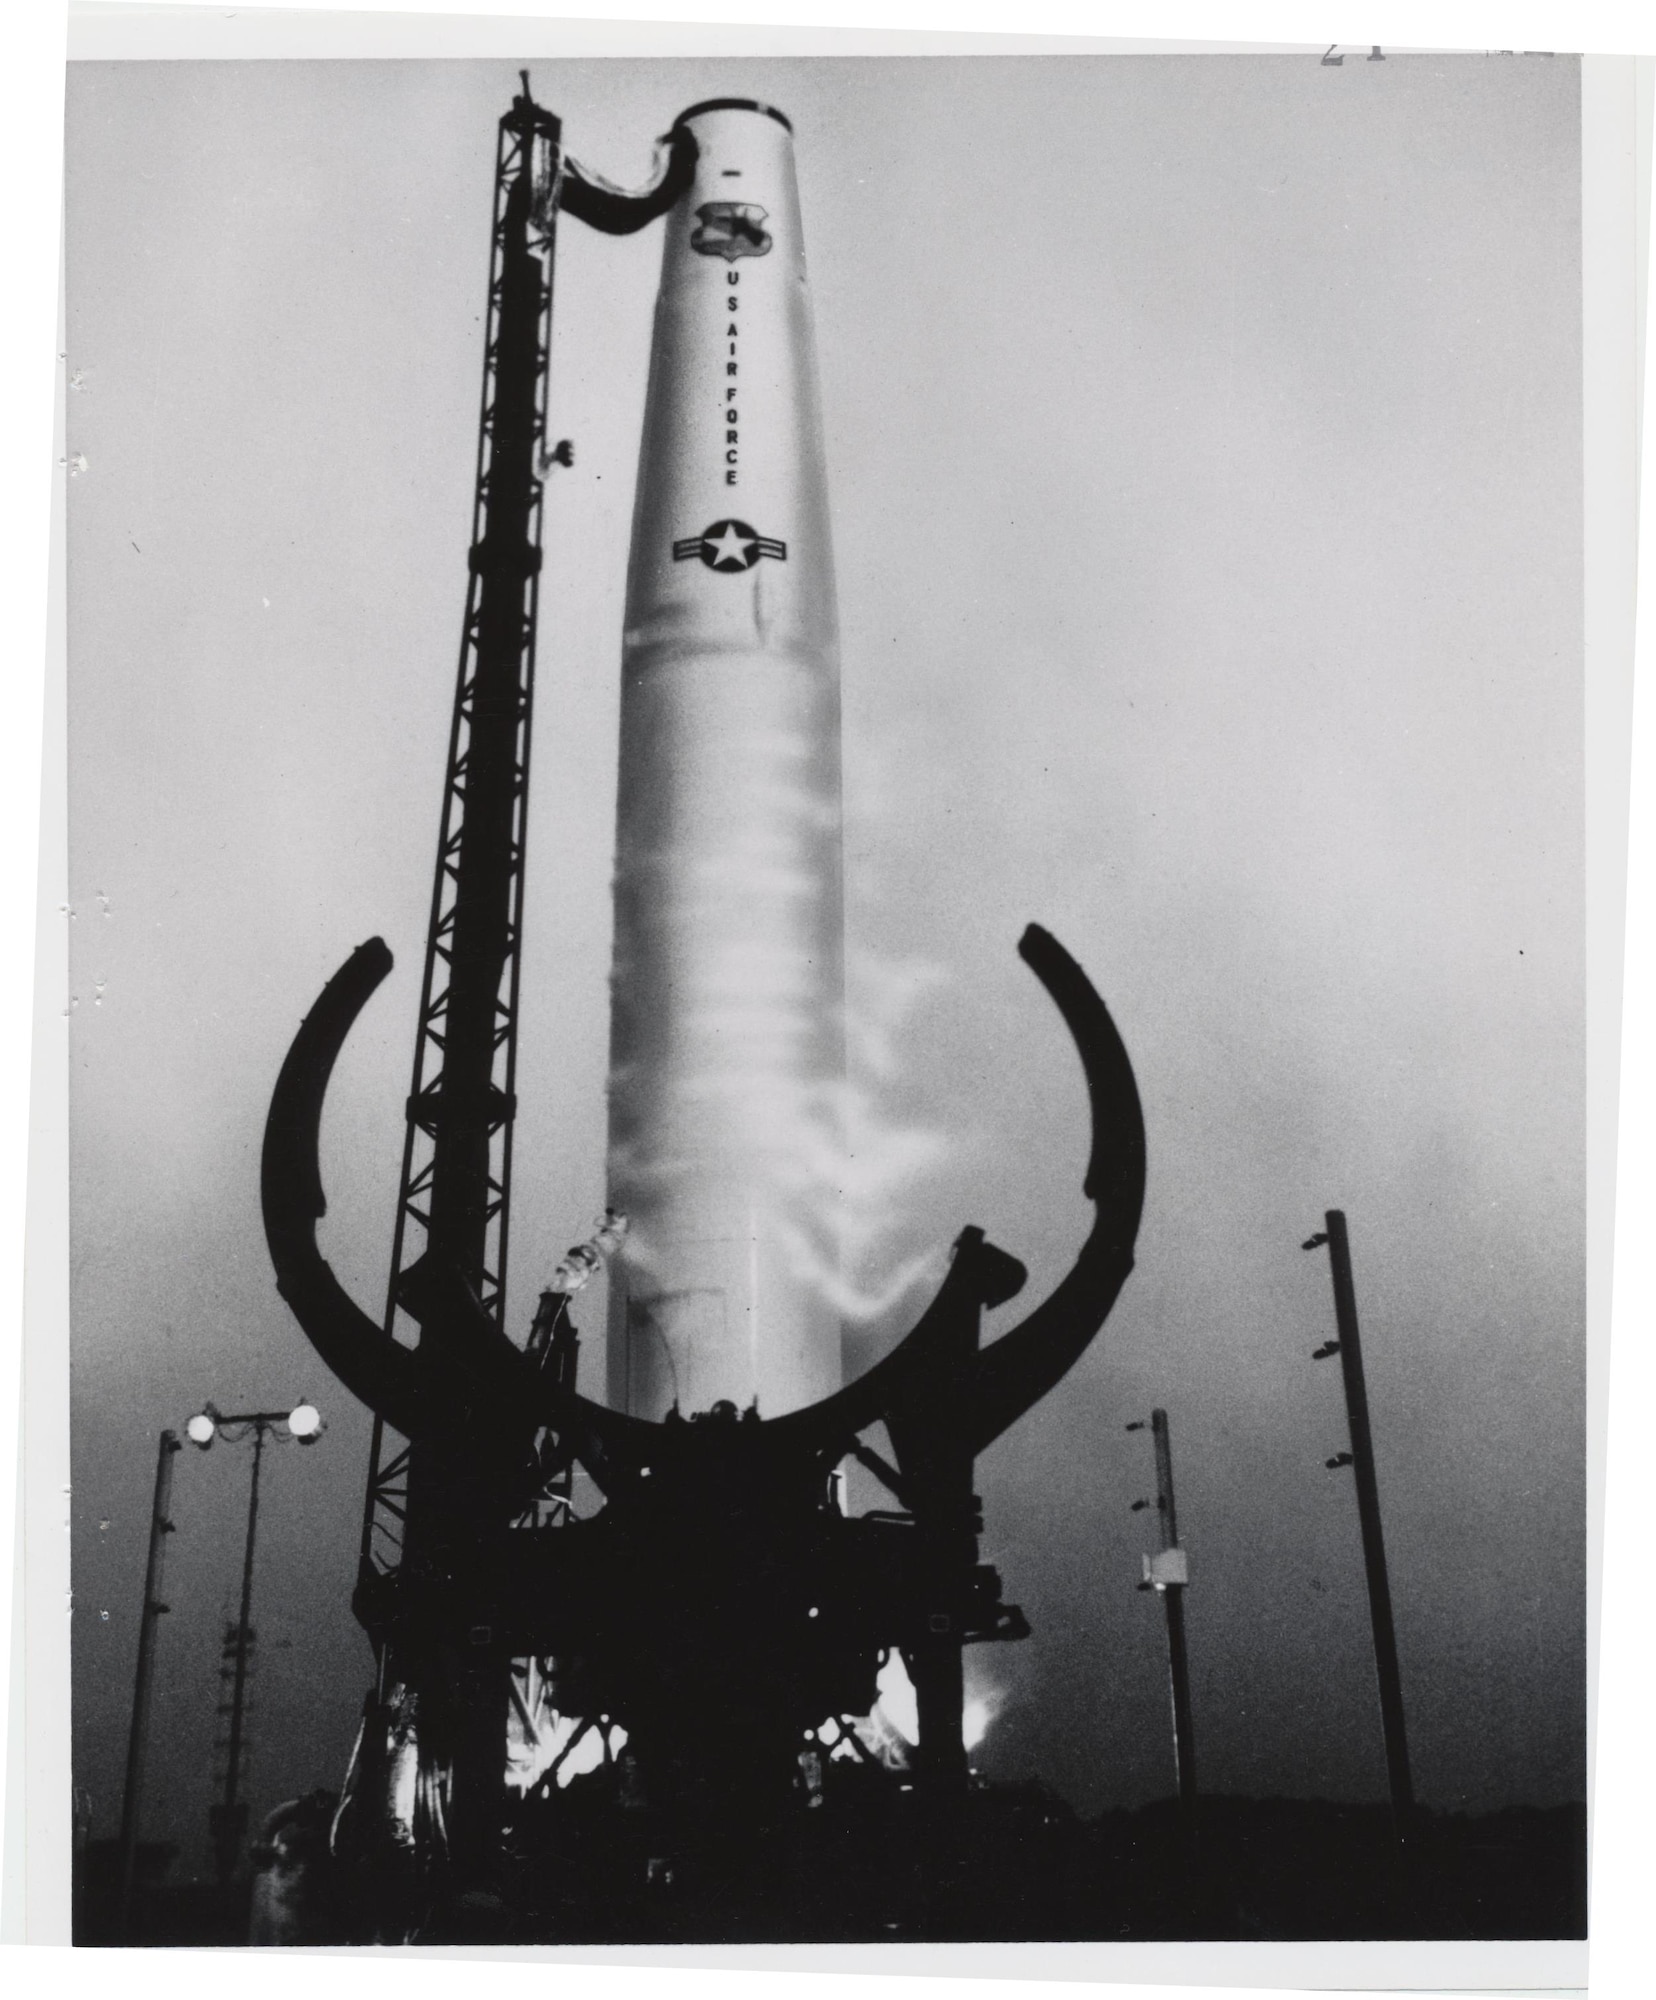 A Thor Intermediate Range Ballistic Missile, nicknamed “Tune Up”, prepares to depart from Launch Facility 75-1-1, Dec. 16, 1958, Vandenberg Air Force Base, Calif. Demonstrating operational capability, the successful test was conducted only a year after the base was activated -- and ignited a launch legacy spanning more than five decades. (Courtesy photo)